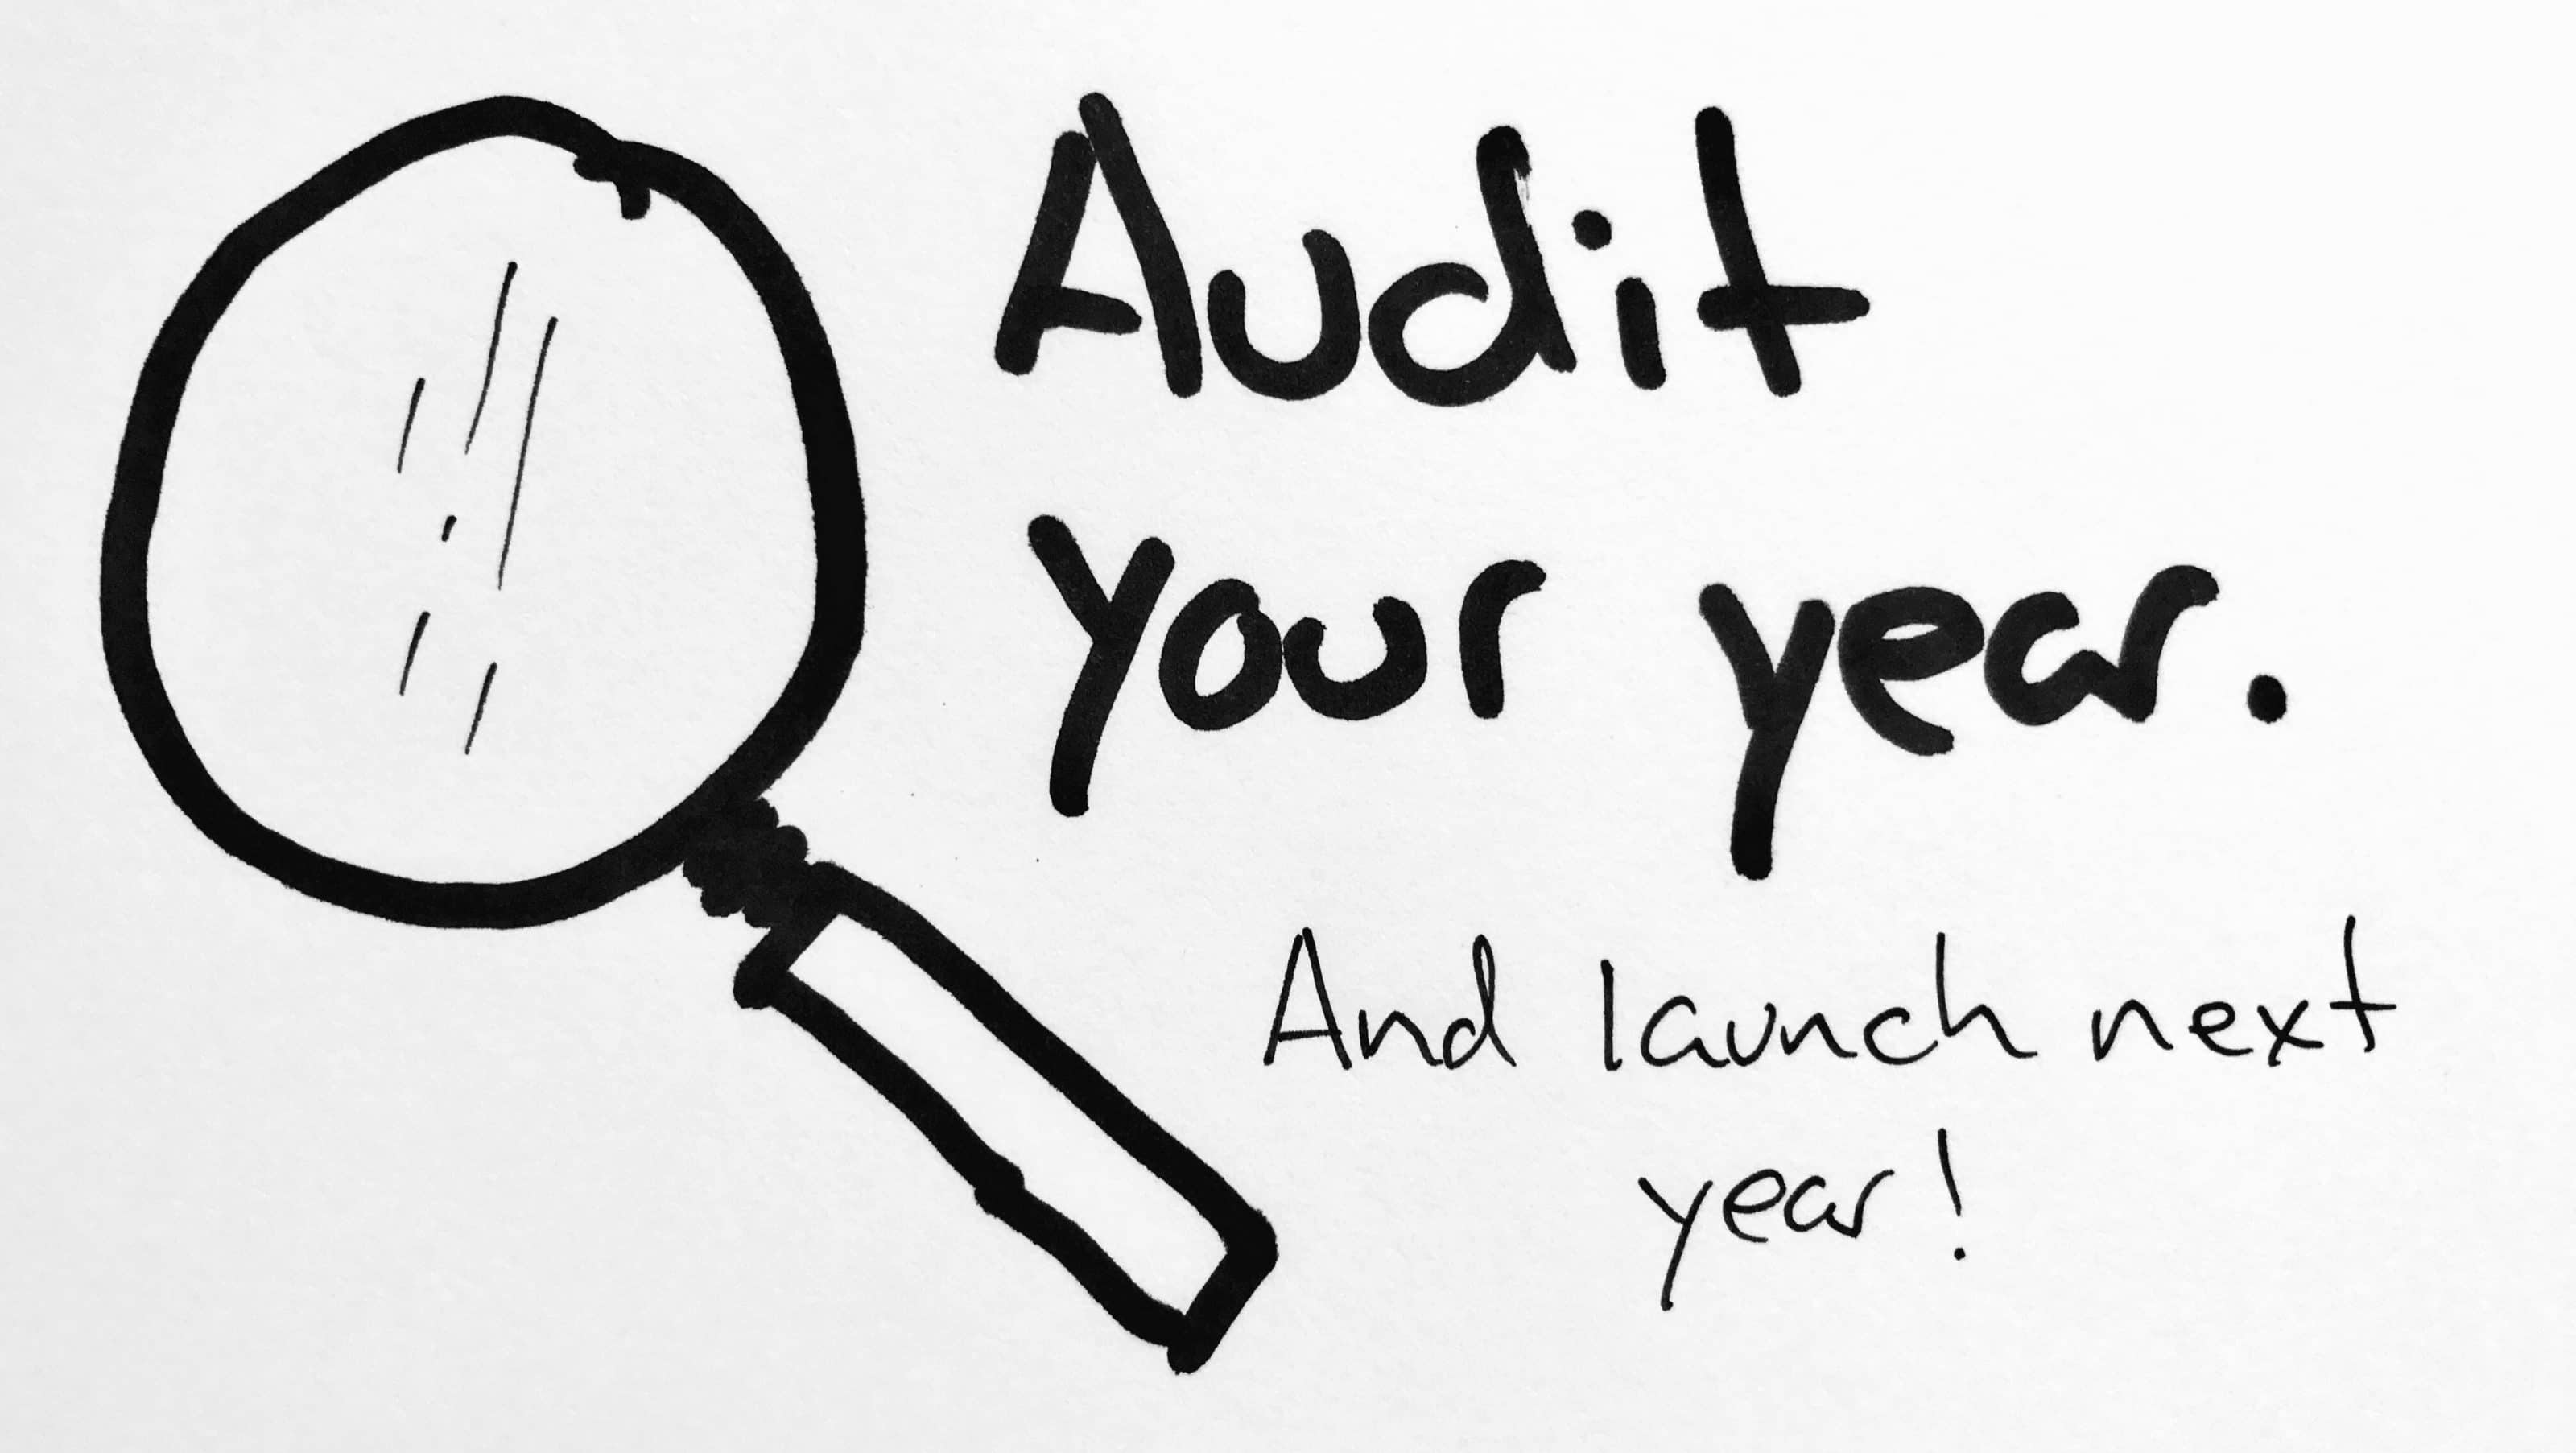 Audit Your Year & Finish Strong